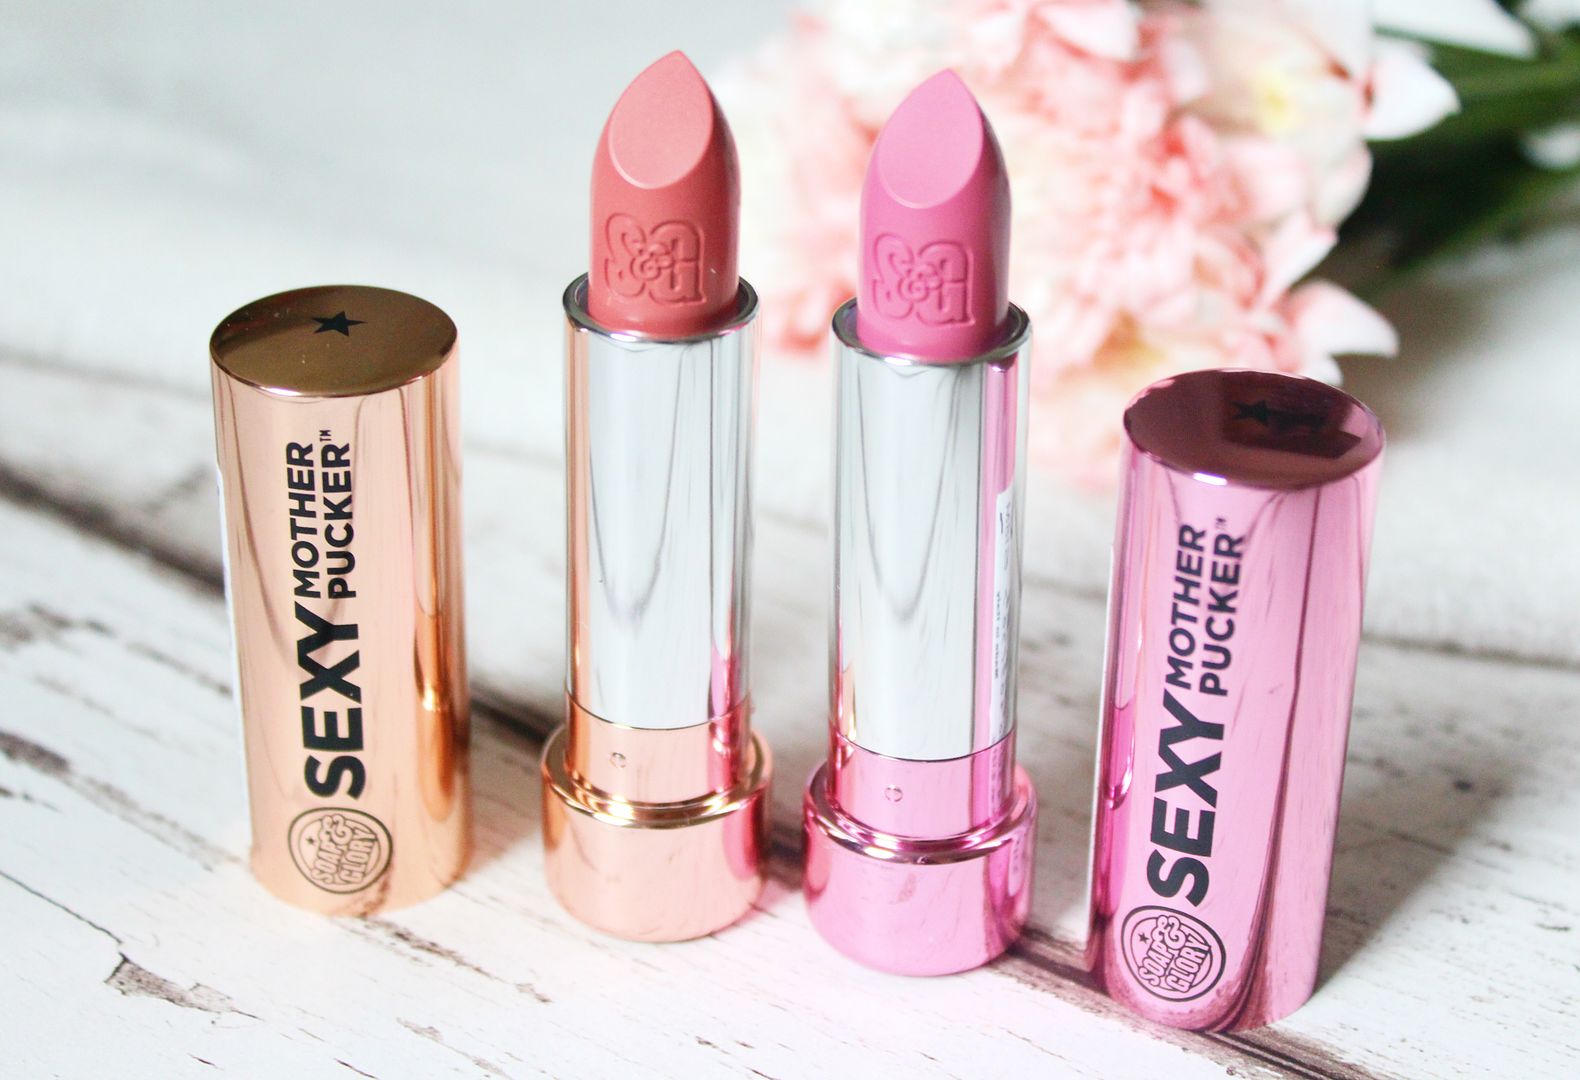 New Soap And Glory Sexy Mother Pucker Lipsticks Nude Pink Naked Talent Pink Up Girl Review Photo Belle-Amie UK Beauty Fashion Lifestyle Blog